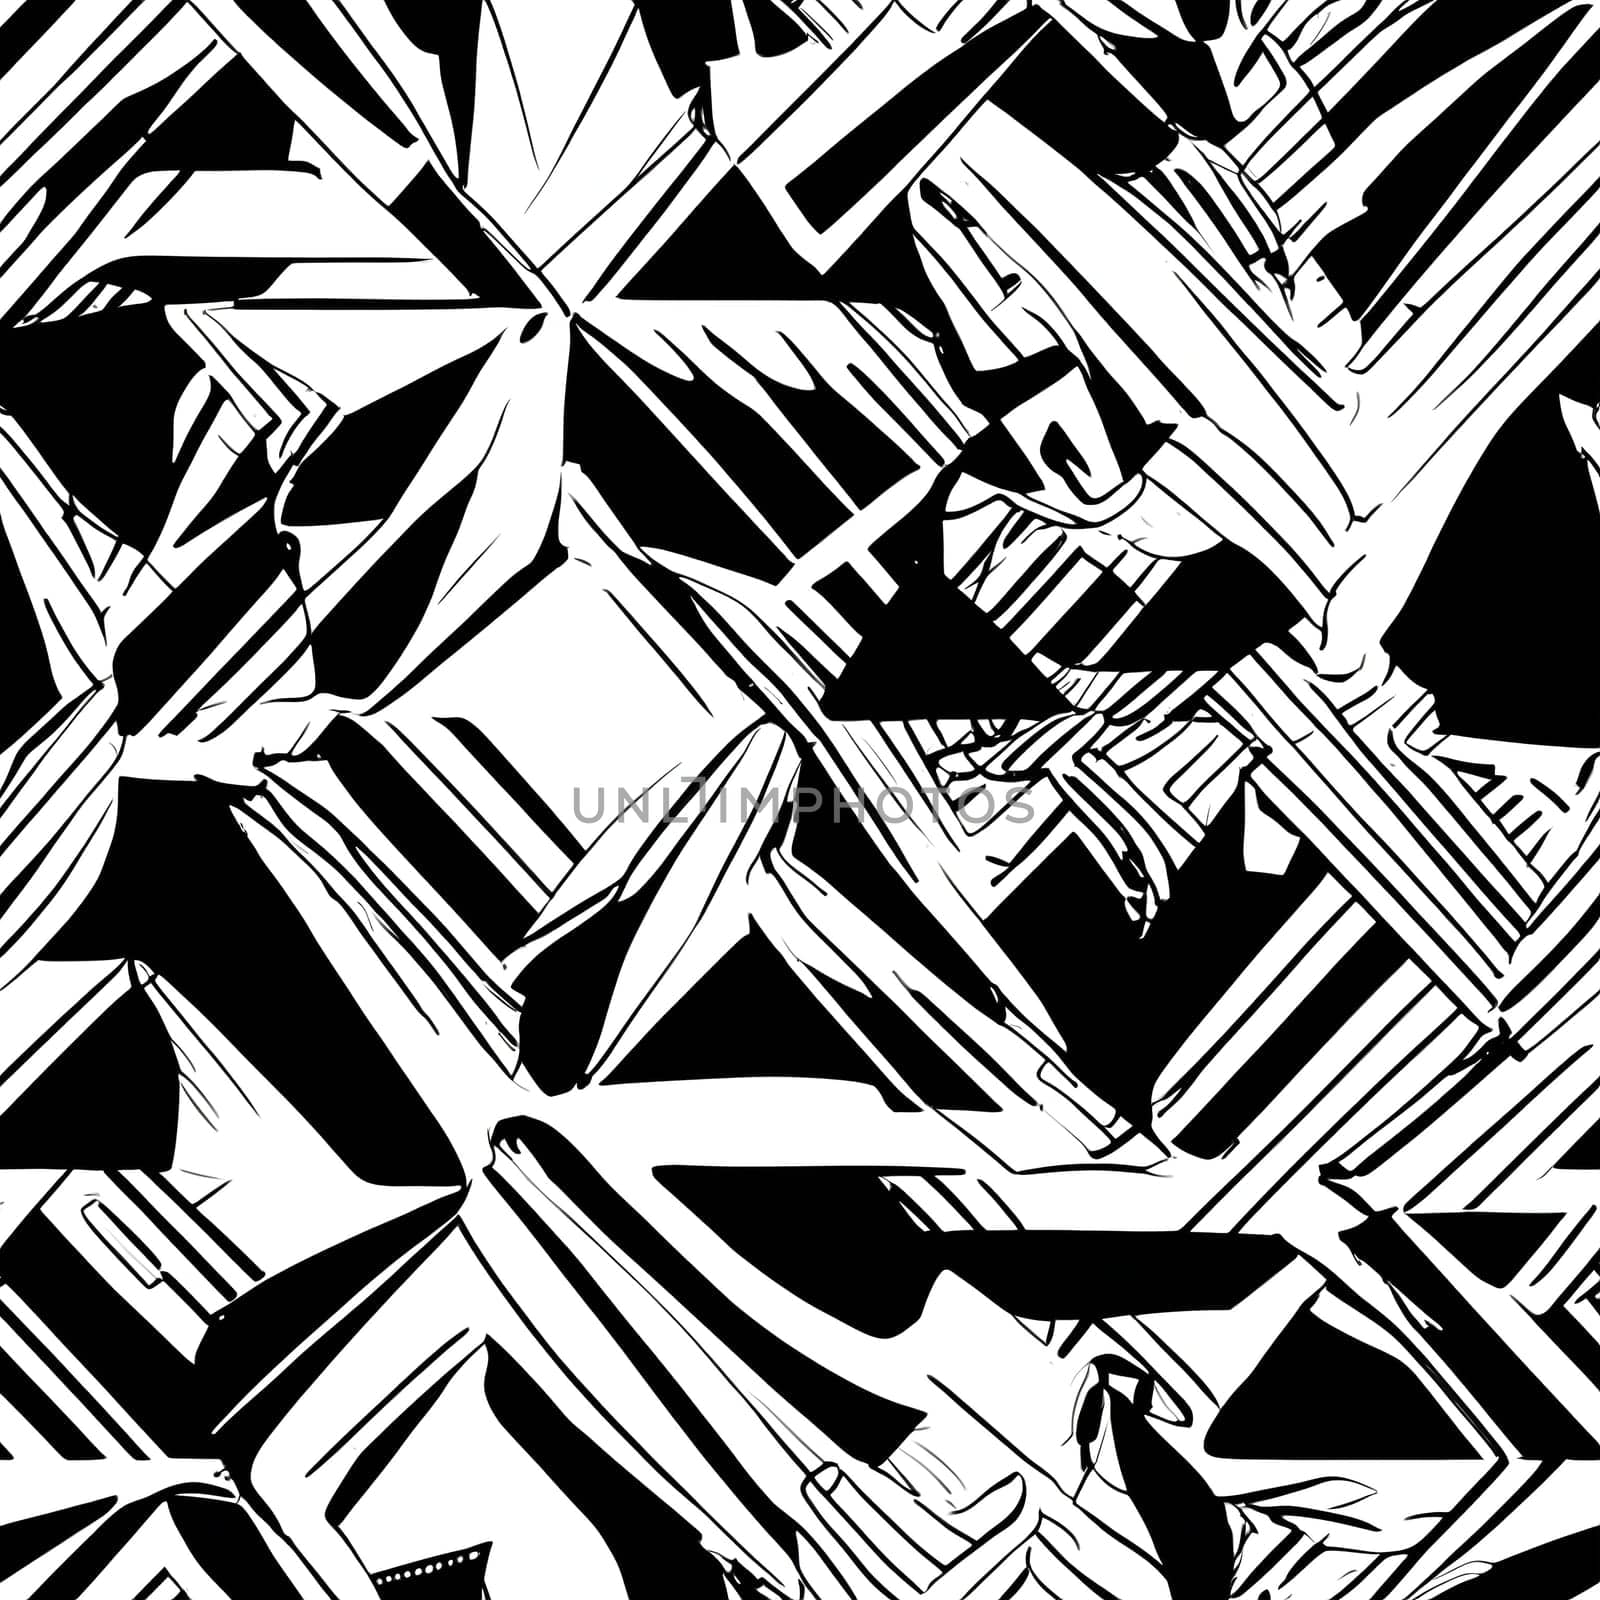 A seamless pattern featuring a black and white abstract design with intersecting lines.